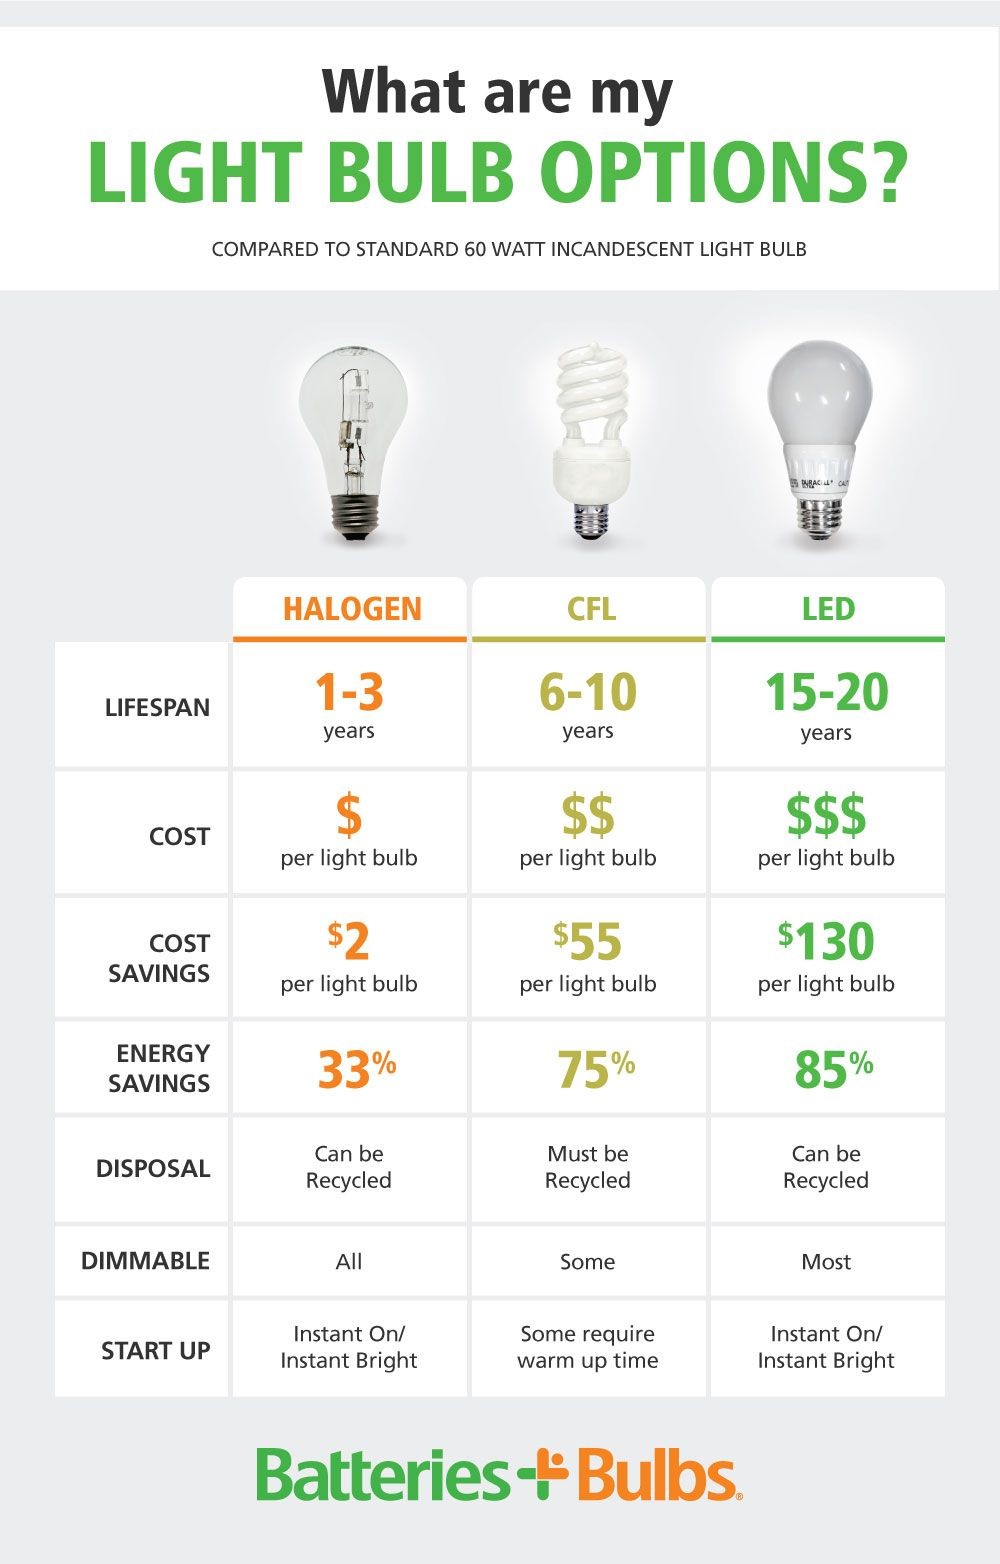 Light Bulb Website Halogen bulbs are actually a form of incandescent light that give off a strong light having color temp